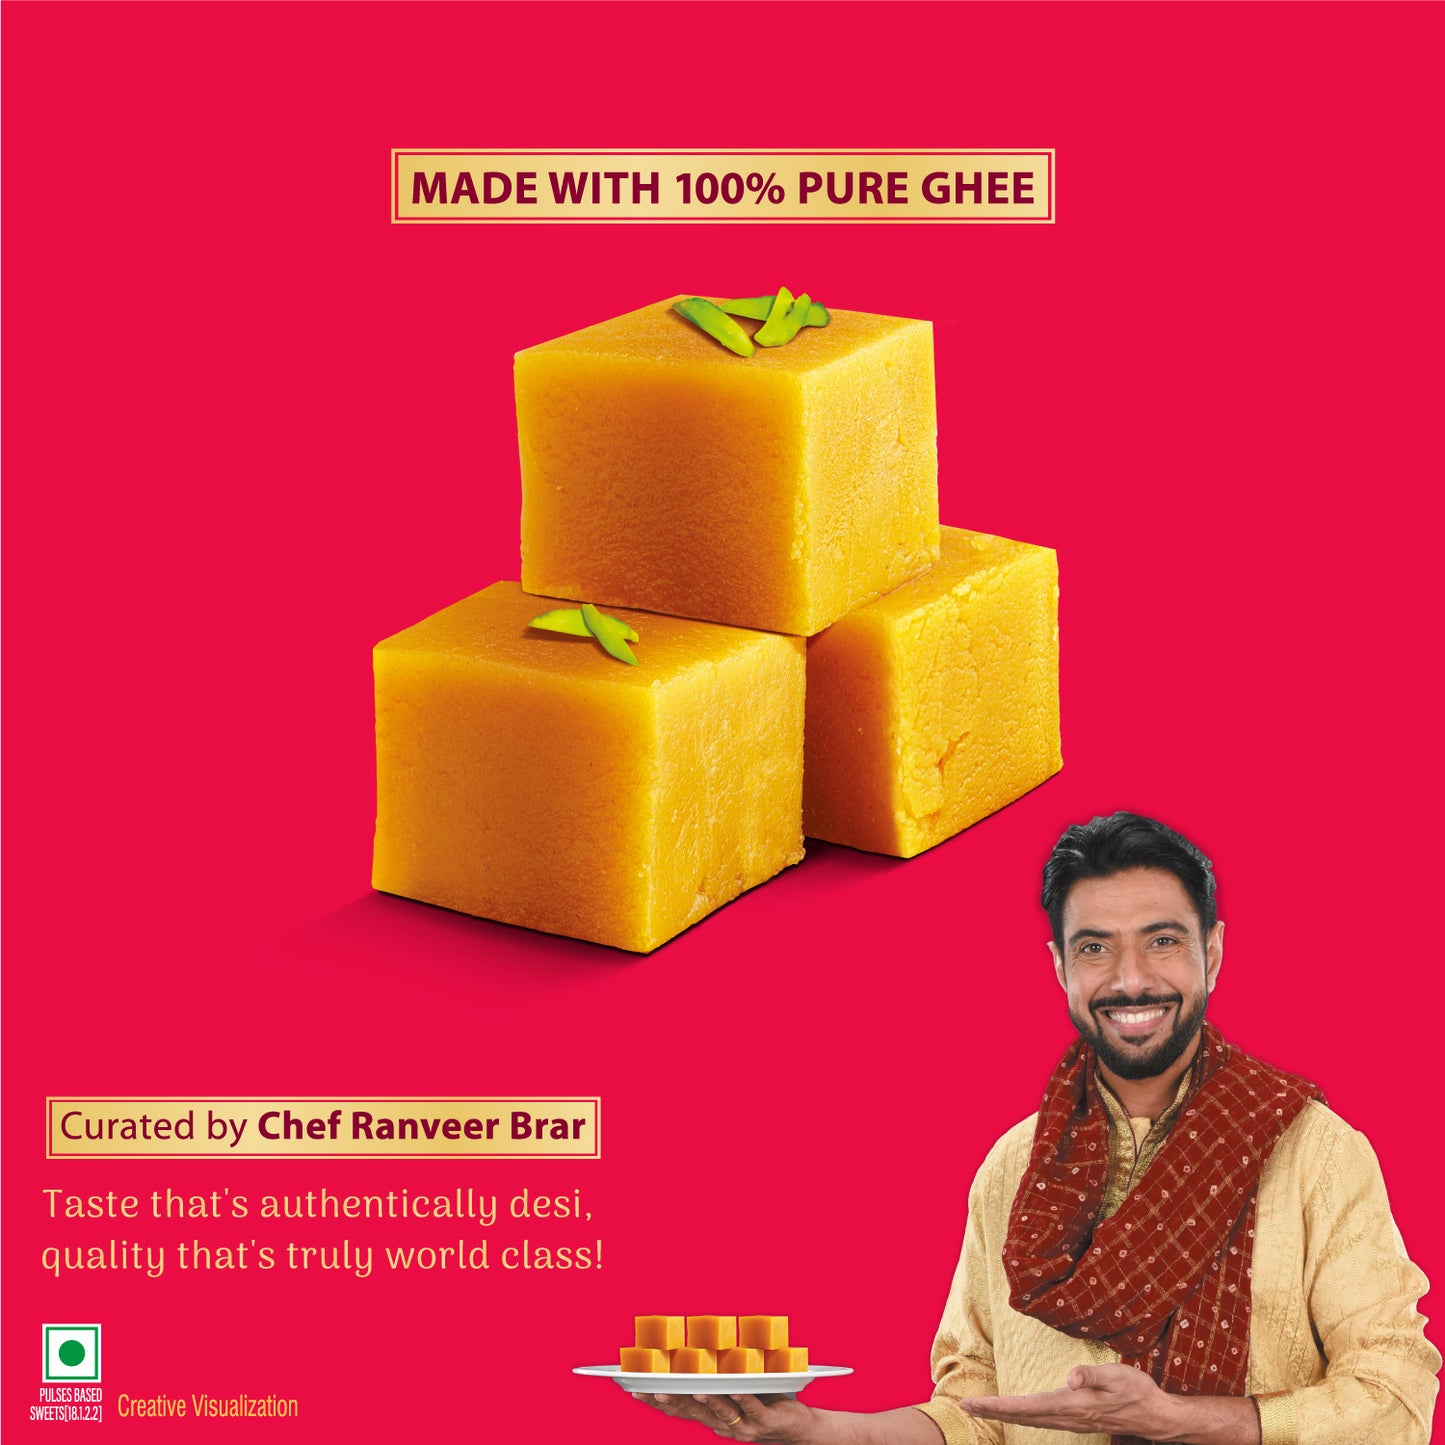 Swaadesi Ghee Mysore Pak Tin Pack 280 grams  (Indian Sweet Made with 100% Pure Ghee)